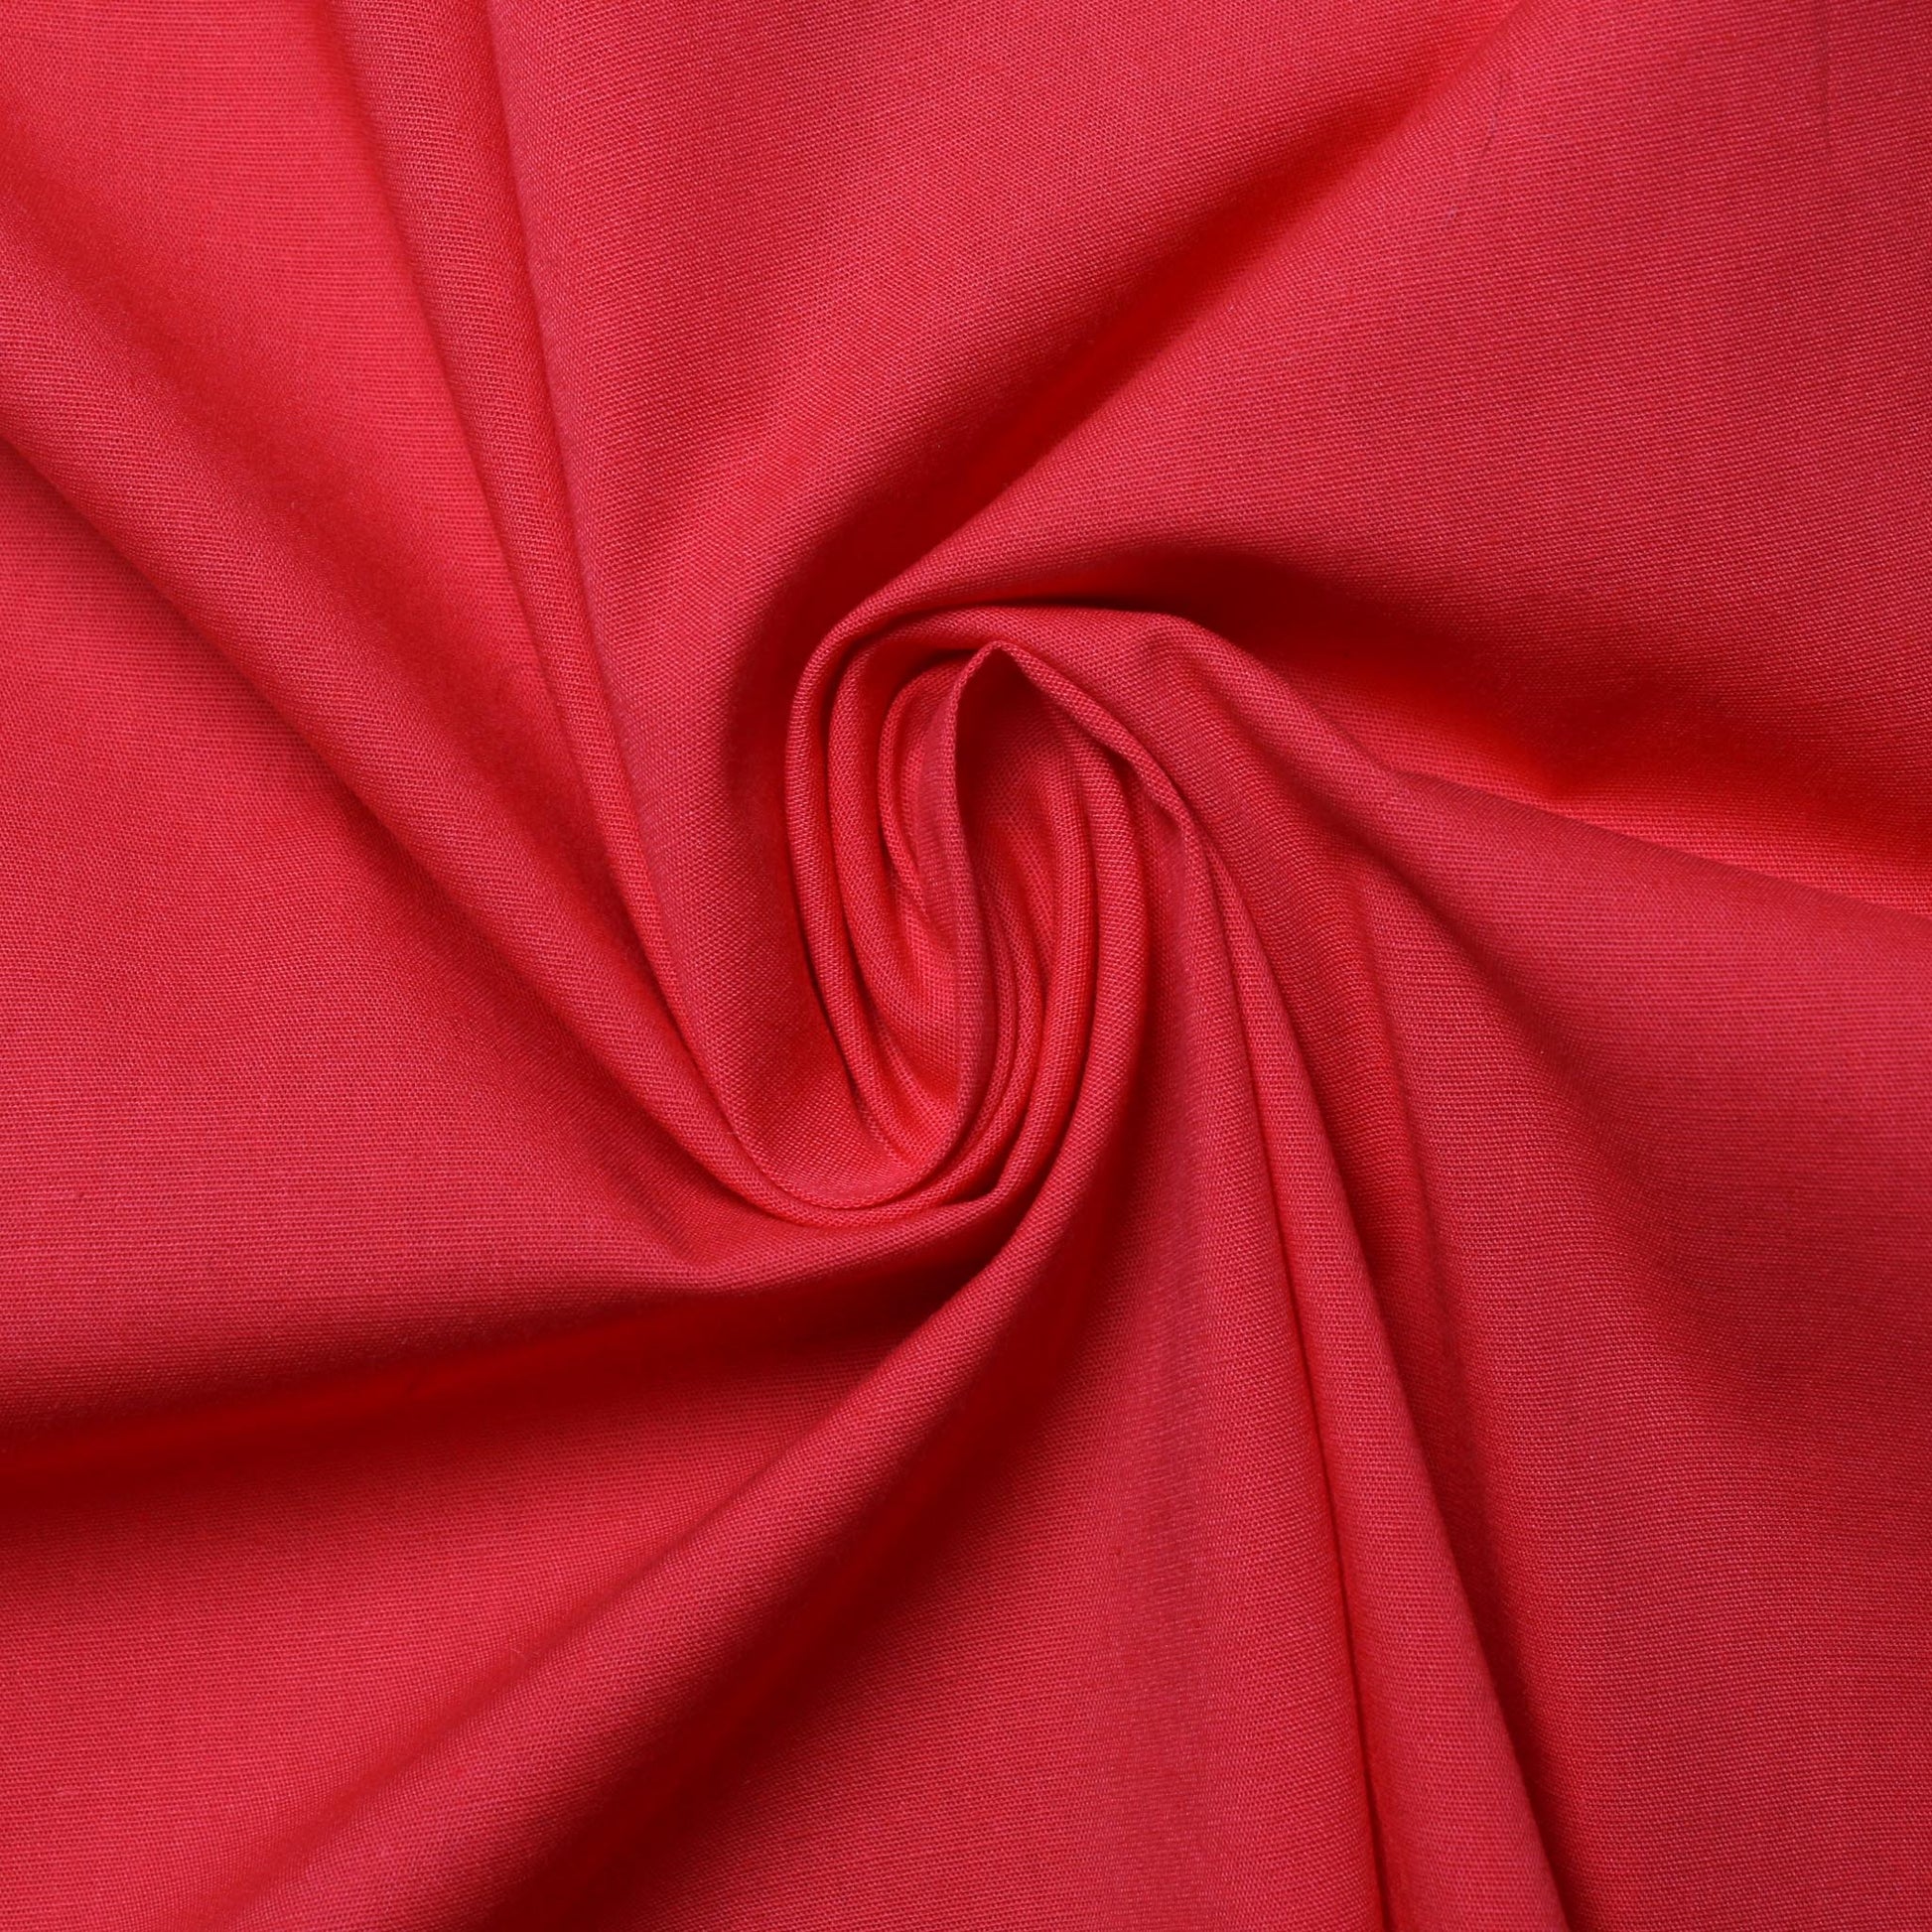 stretchy plain red cotton dress fabric